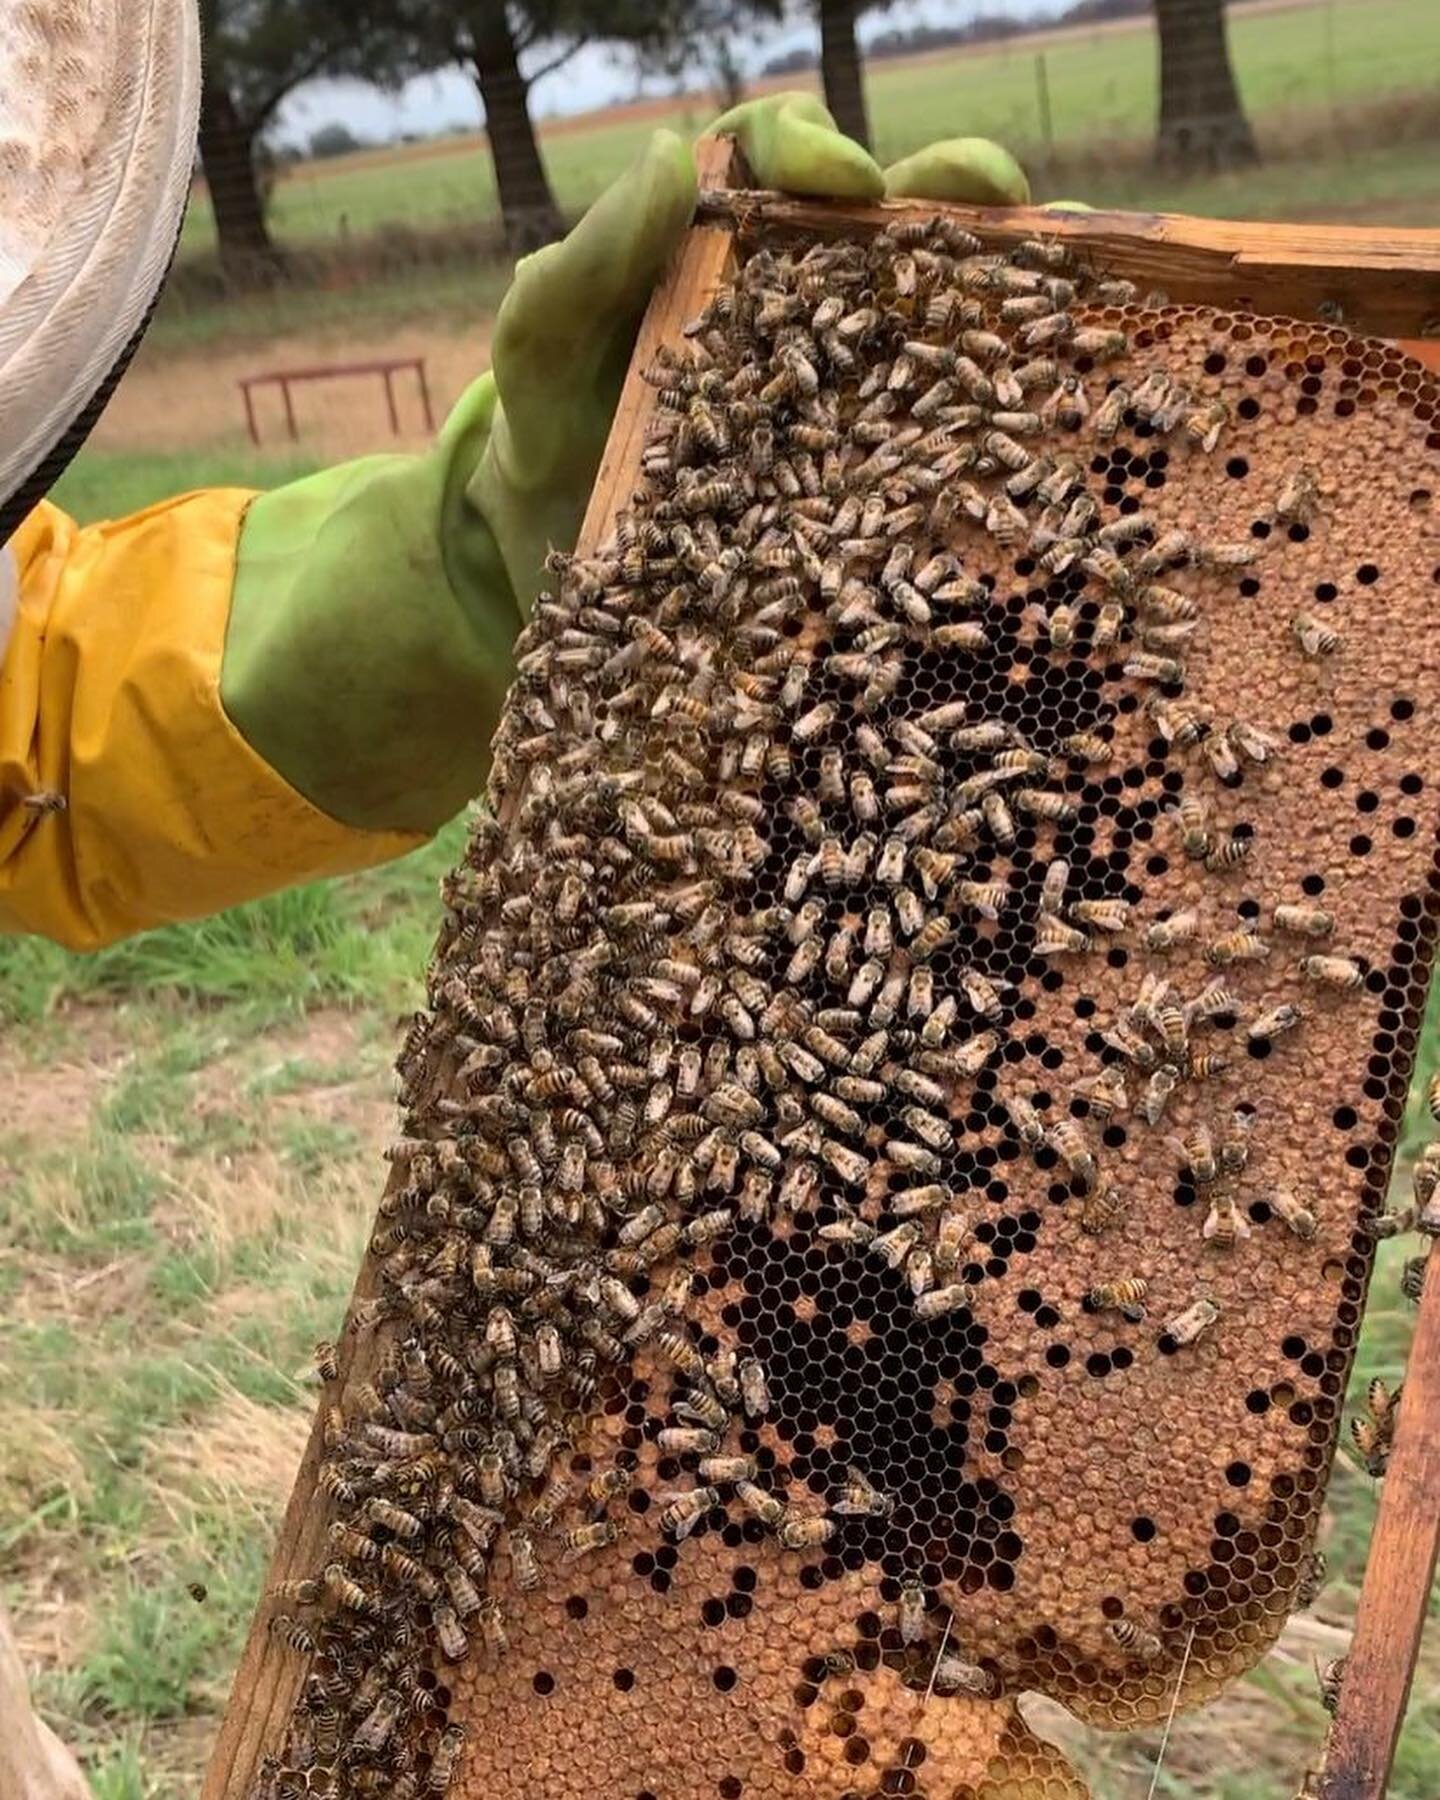 Our hives are buzzing with activity at #vusisfarm as the worker bees are hard at work producing honey🍯.